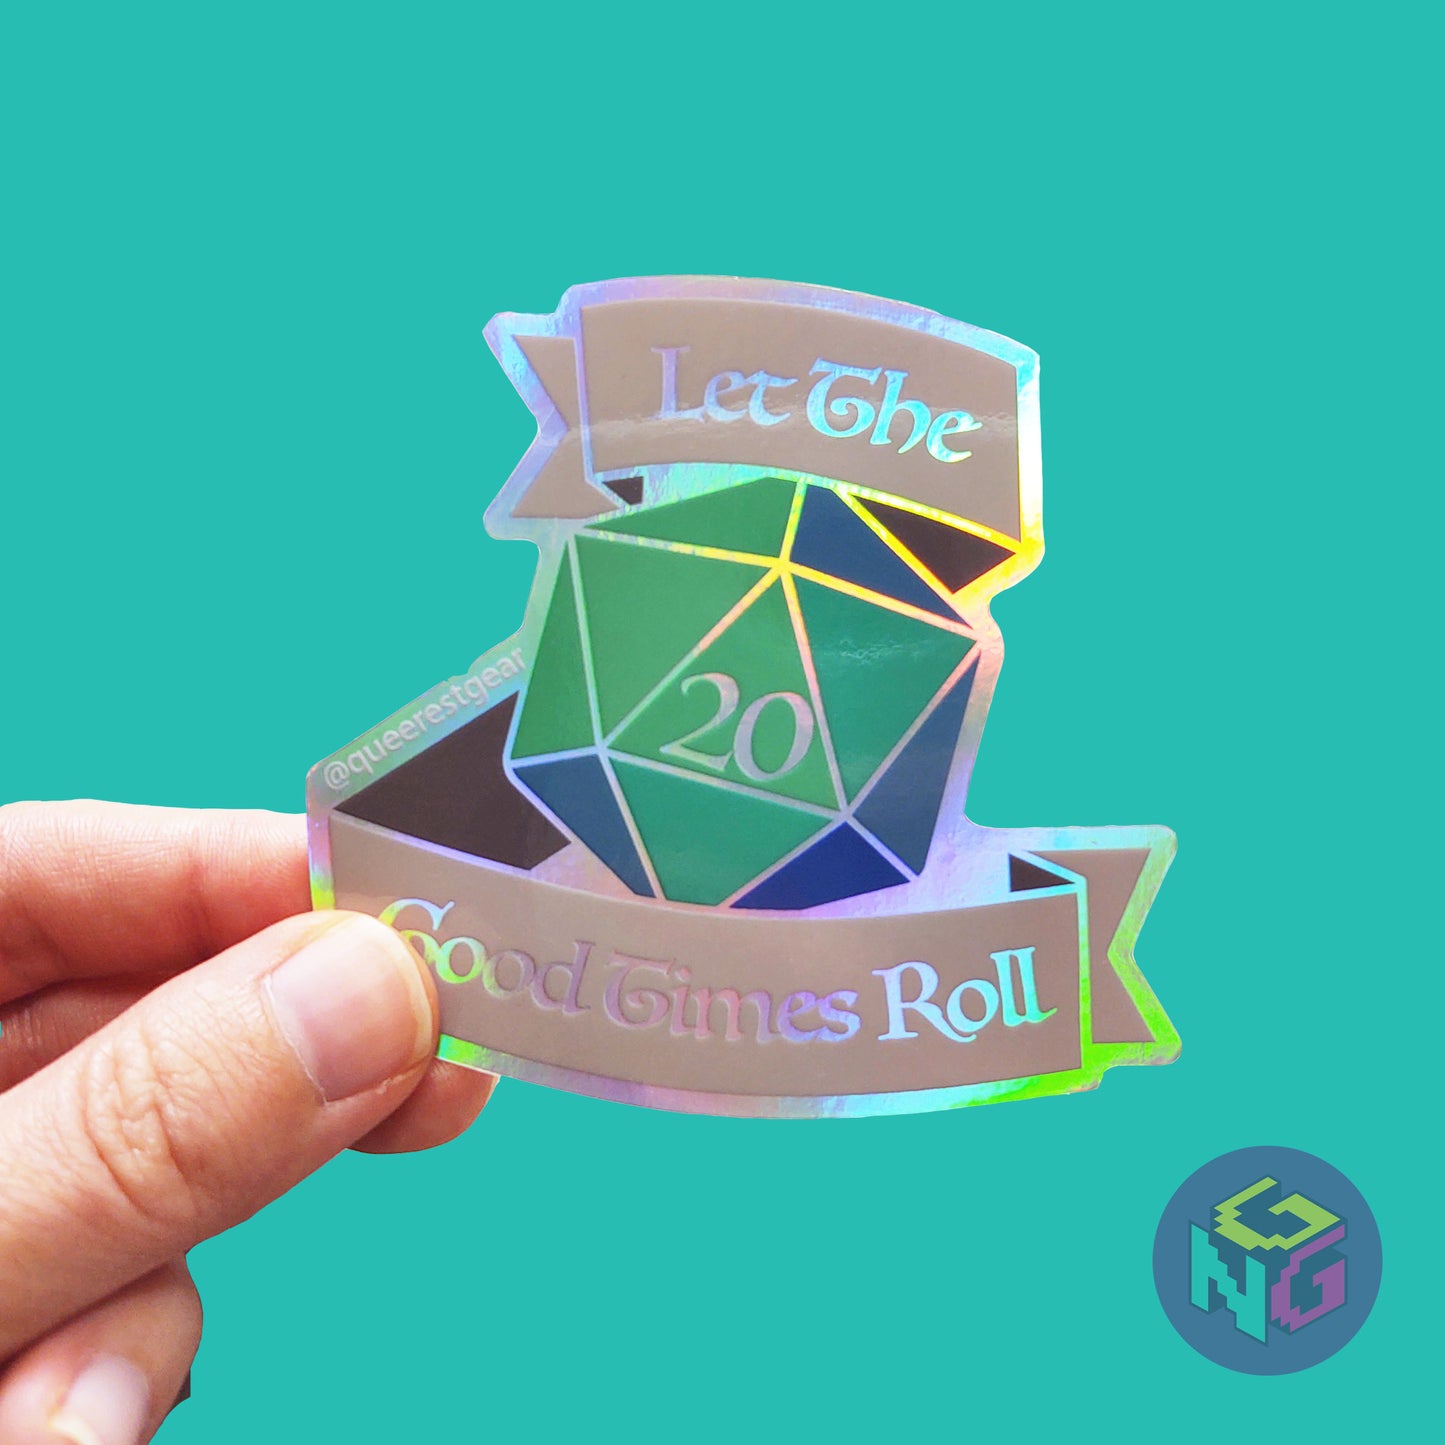 rainbow holographic let the good times roll d20 sticker held in hand against mint green background